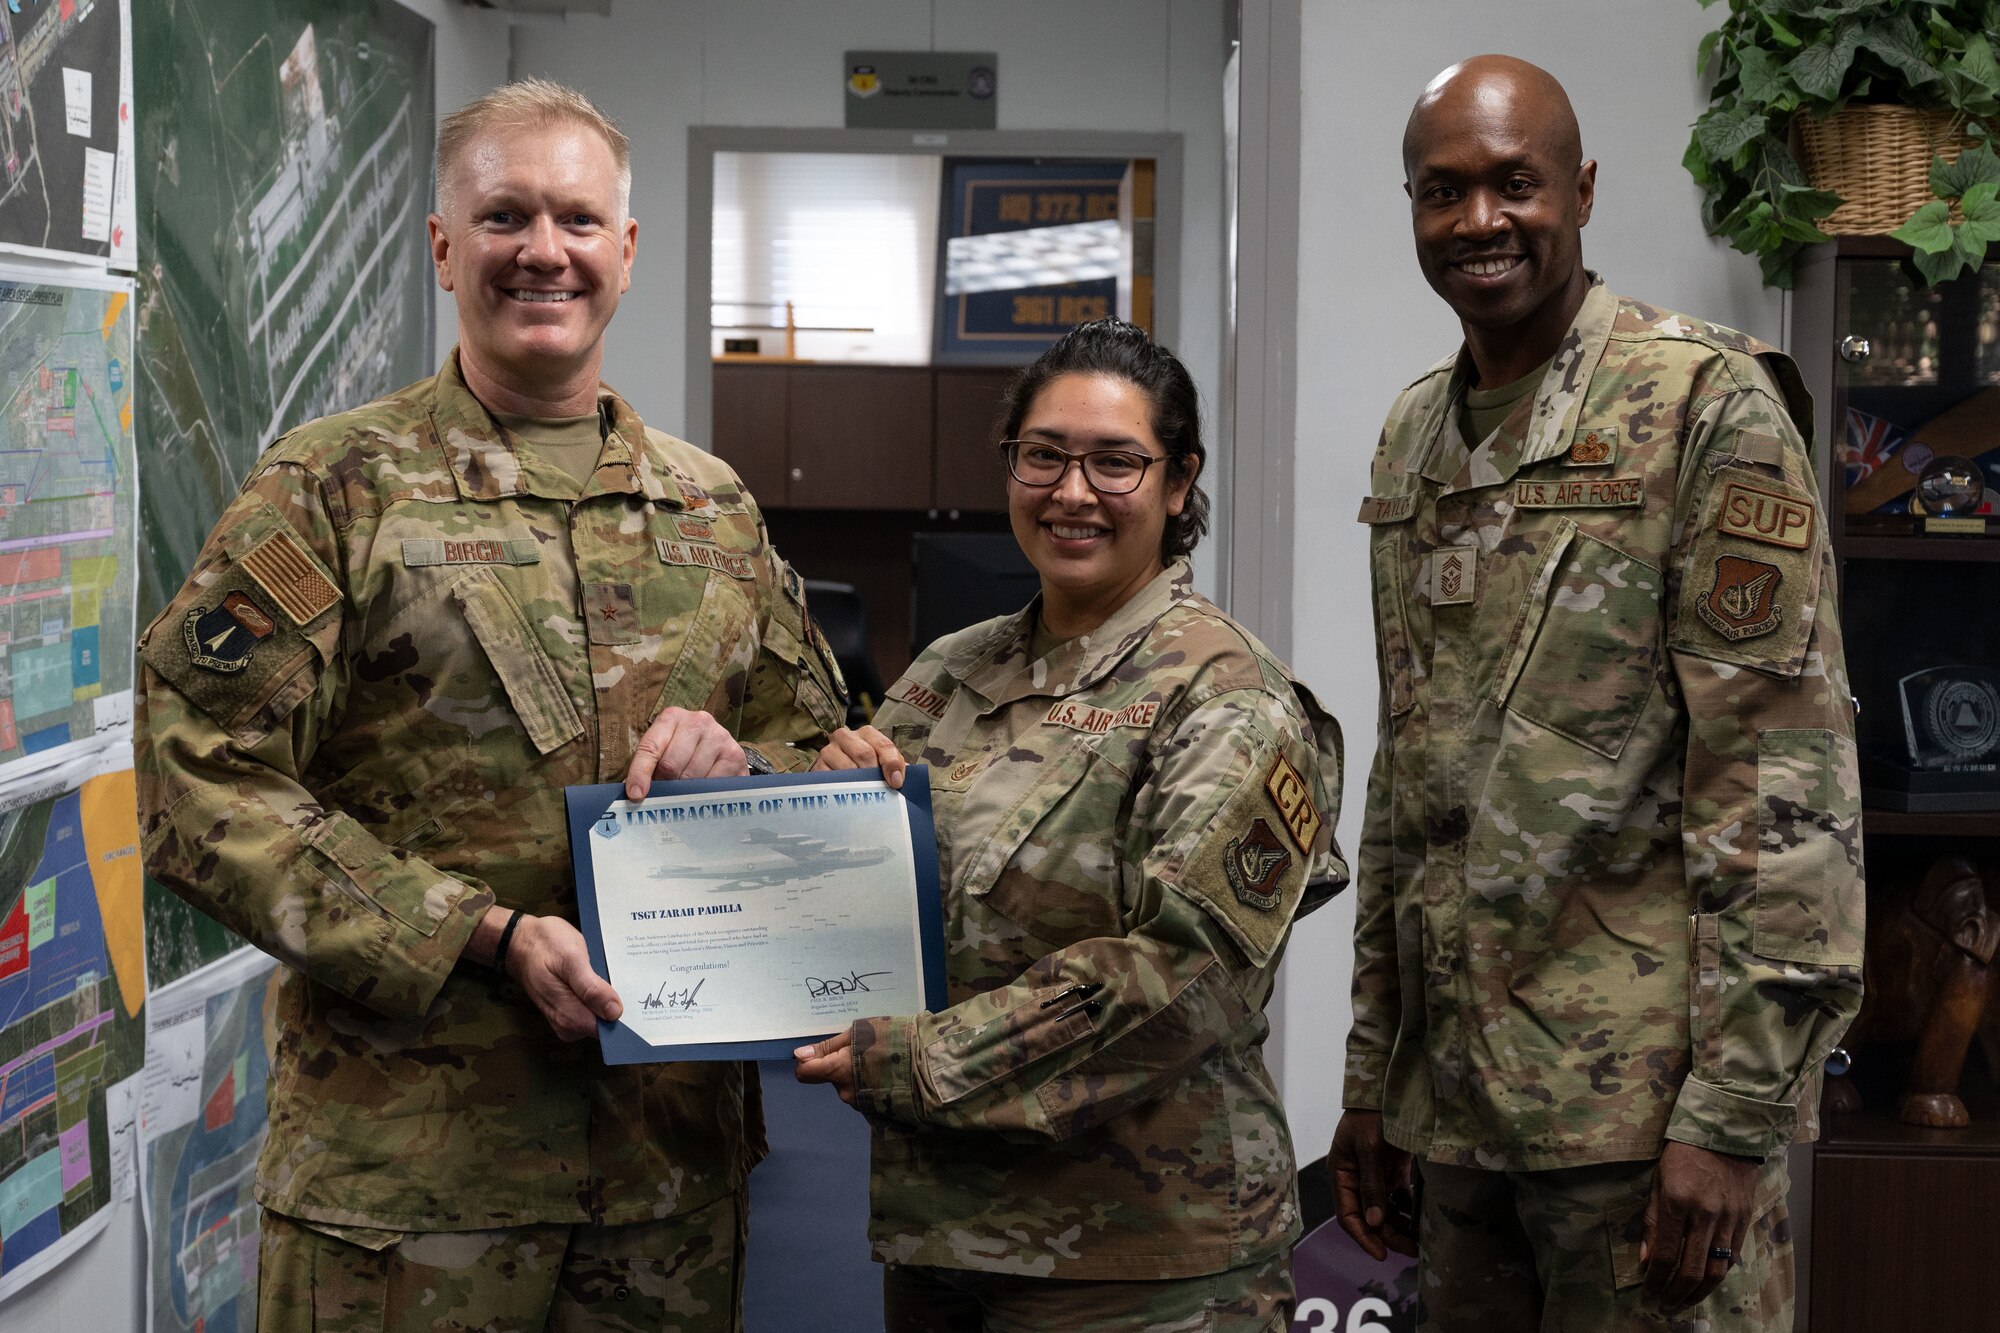 U.S. Air Force Tech. Sgt. Zarah Padilla, the commander’s executive assistant assigned to the 36th Contingency Response Group, receives the Linebacker of the Week Award from U.S. Air Force Brig. Gen. Paul Birch, commander of the 36th Wing, and U.S. Air Force Chief Master Sgt. Nicholas Taylor, the command chief of the 36th Wing, at Andersen Air Force Base, Guam, Jan. 18, 2023. The Team Andersen Linebacker of the Week recognizes outstanding enlisted, officer, civilian and total force personnel who have had an impact on achieving Team Andersen’s mission, vision and priorities. (U.S. Air Force photo by Airman 1st Emily Saxton)